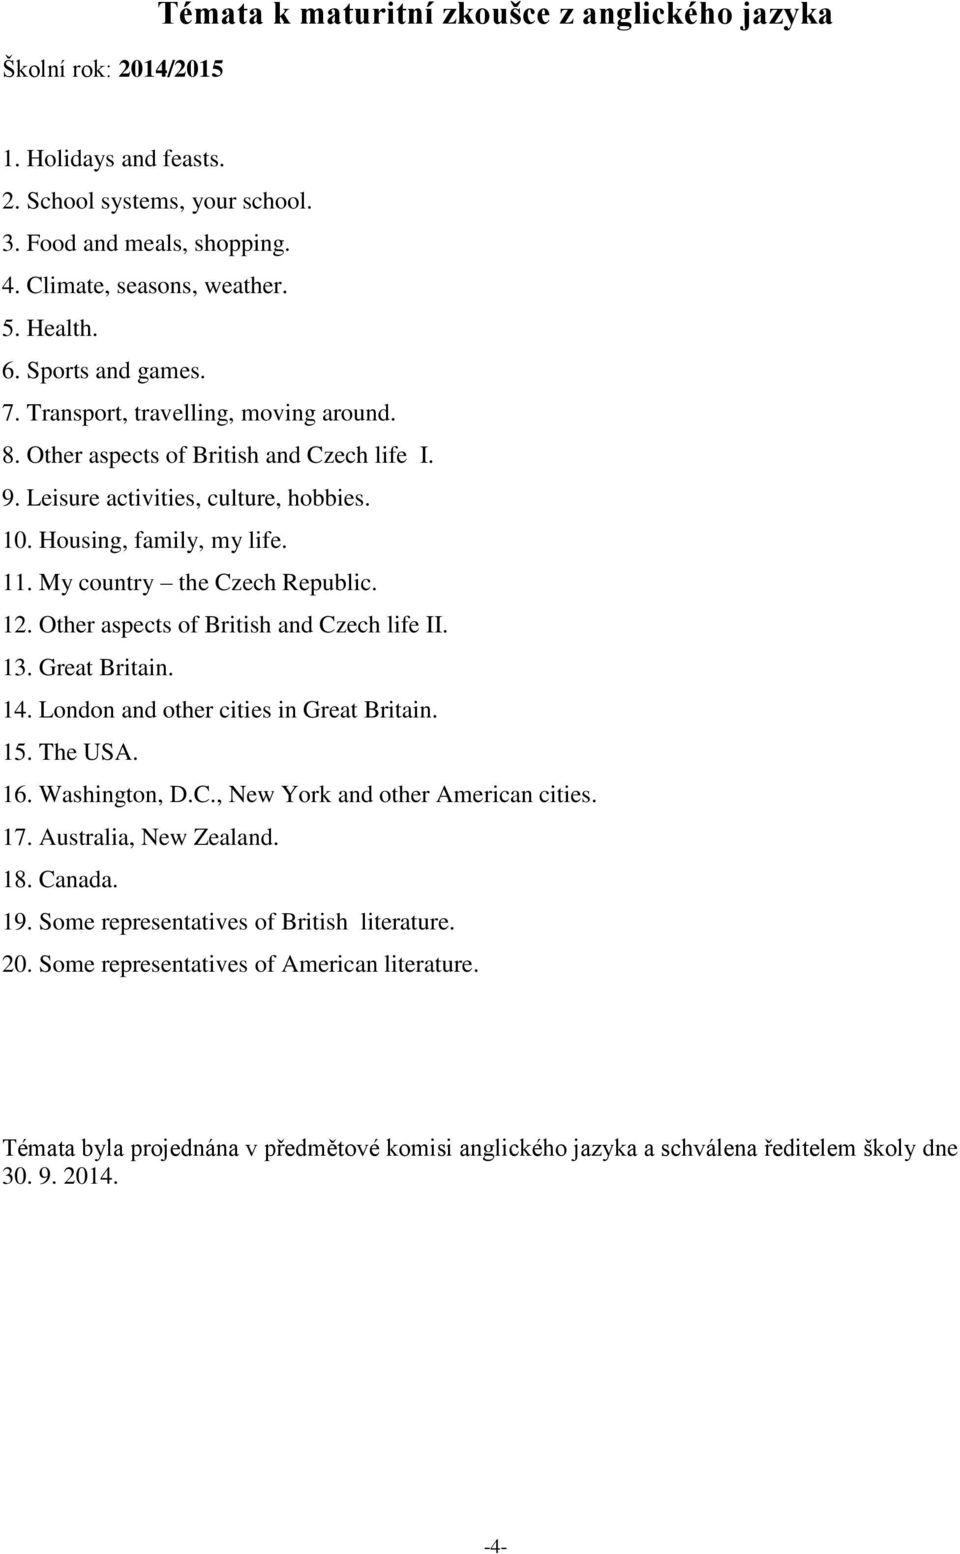 My country the Czech Republic. 12. Other aspects of British and Czech life II. 13. Great Britain. 14. London and other cities in Great Britain. 15. The USA. 16. Washington, D.C., New York and other American cities.